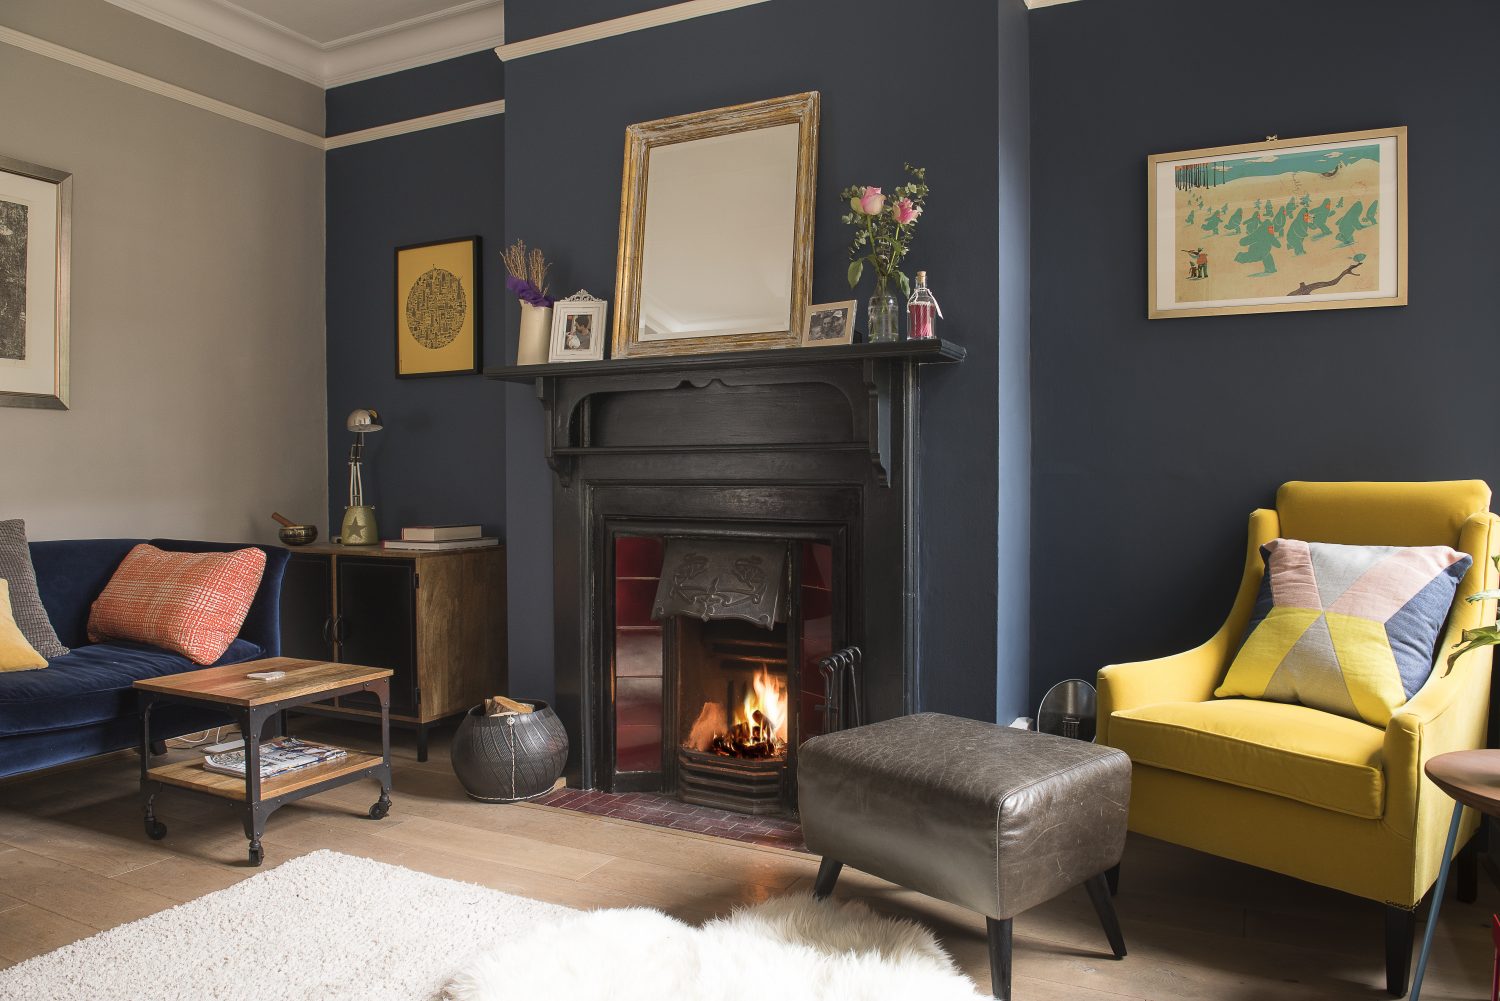 Next to the kitchen is a cosy room known as ‘the snug’. Initially a very light grey, and devoid of much natural light, Caroline has worked with the darkness, choosing deep tones and adding little pops of colour